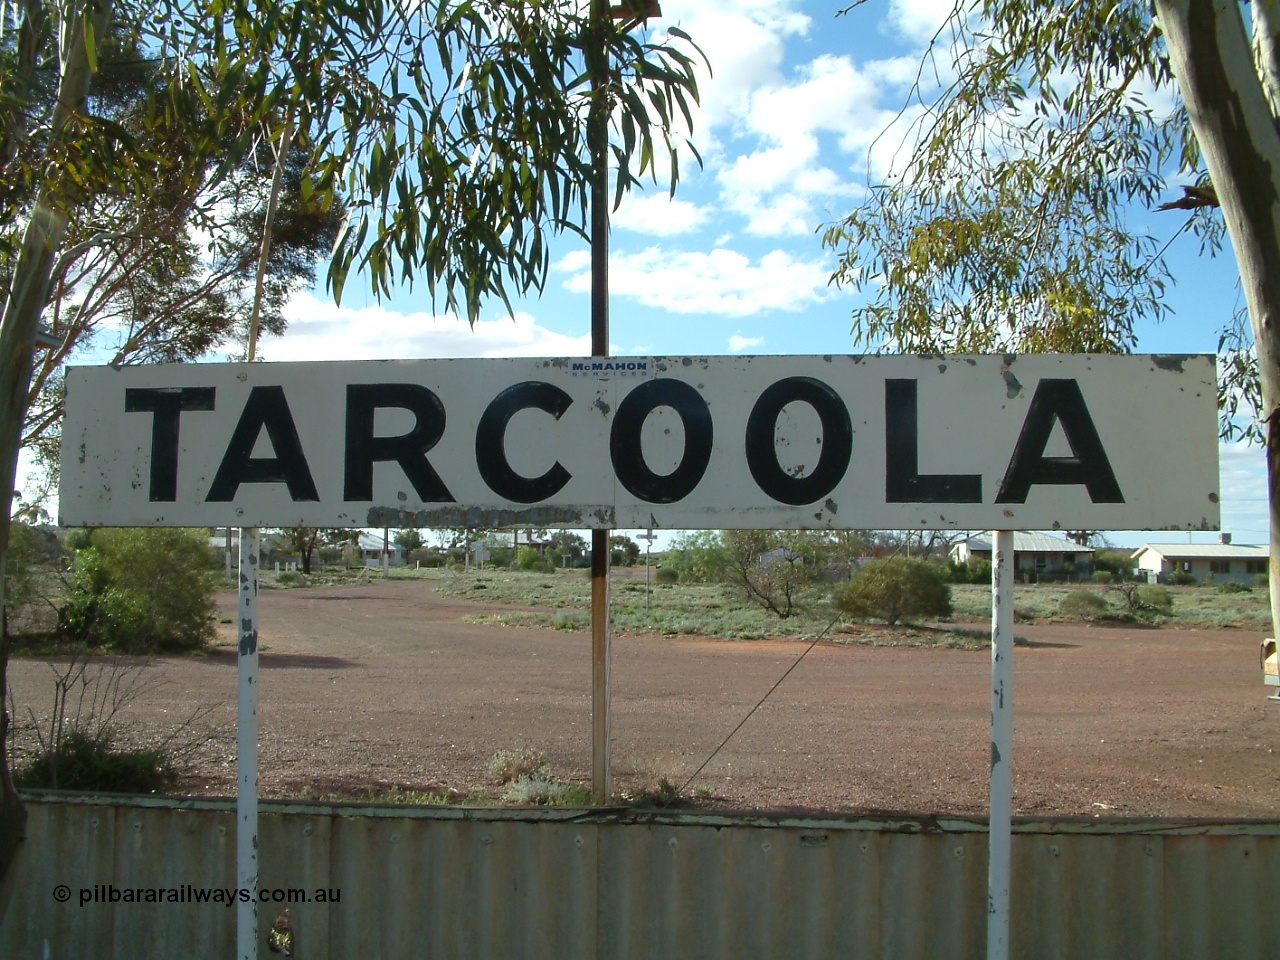 030415 160138
Tarcoola, station nameboard original style, is the junction for the TAR and CAR railways situated 504.5 km from the 0 km datum at Coonamia. [url=https://goo.gl/maps/bJyV81LpHFFg7PGs7]GeoData location[/url]. 15th April 2003.
